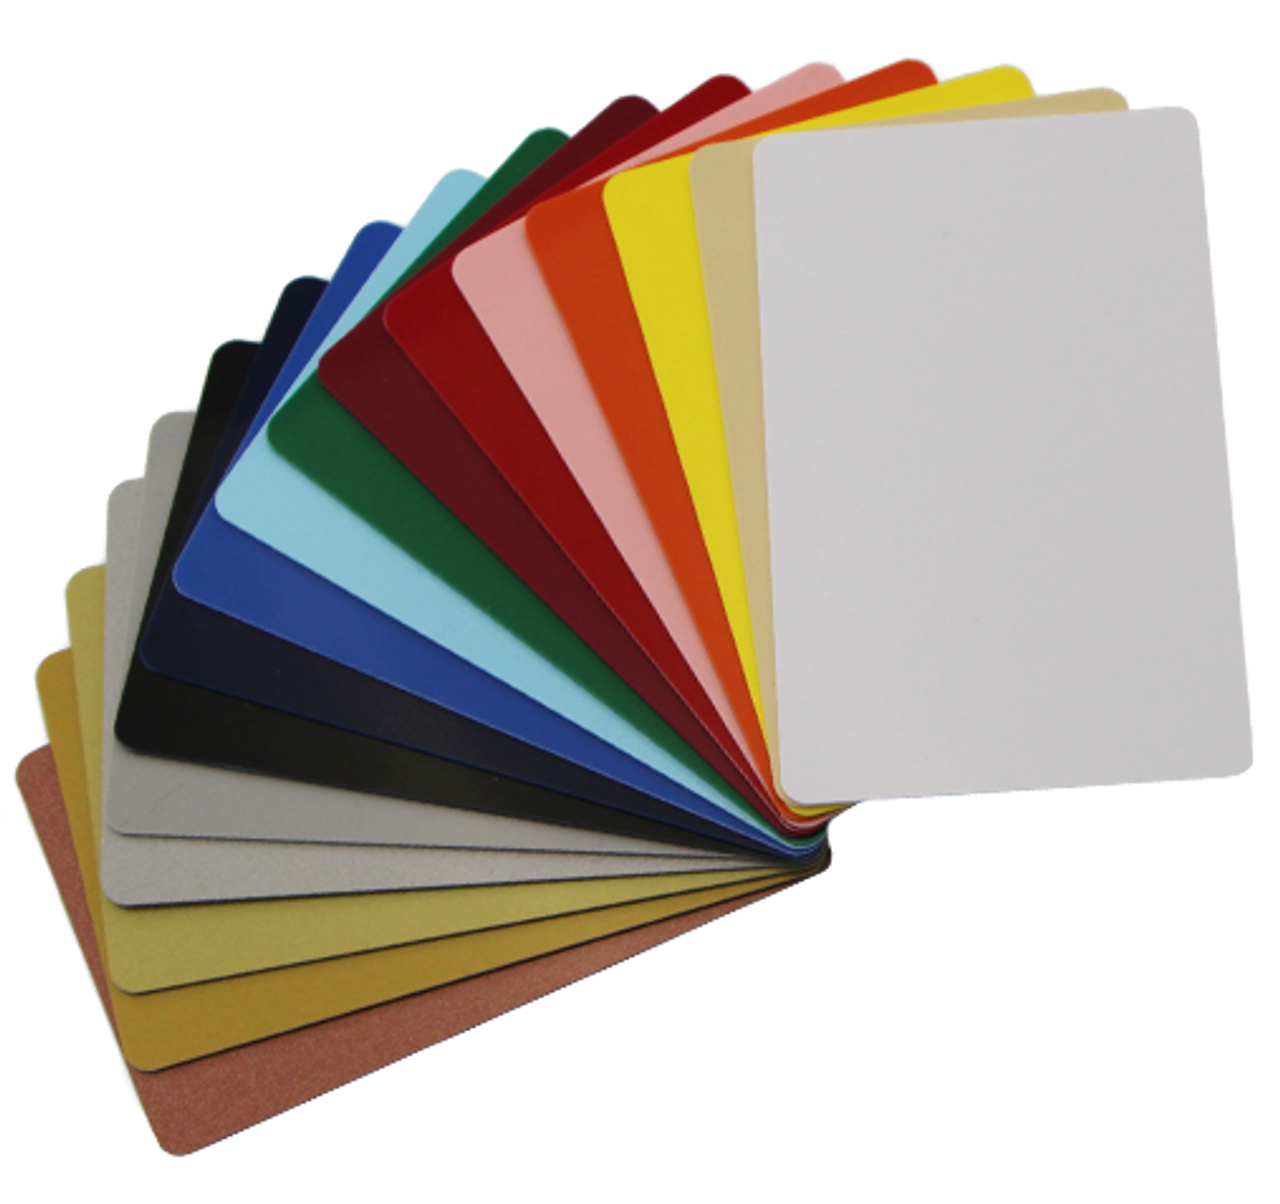 100 Pack - Premium Blank PVC Cards for ID Badge Printers, White, Plastic CR80 30 Mil (CR8030)